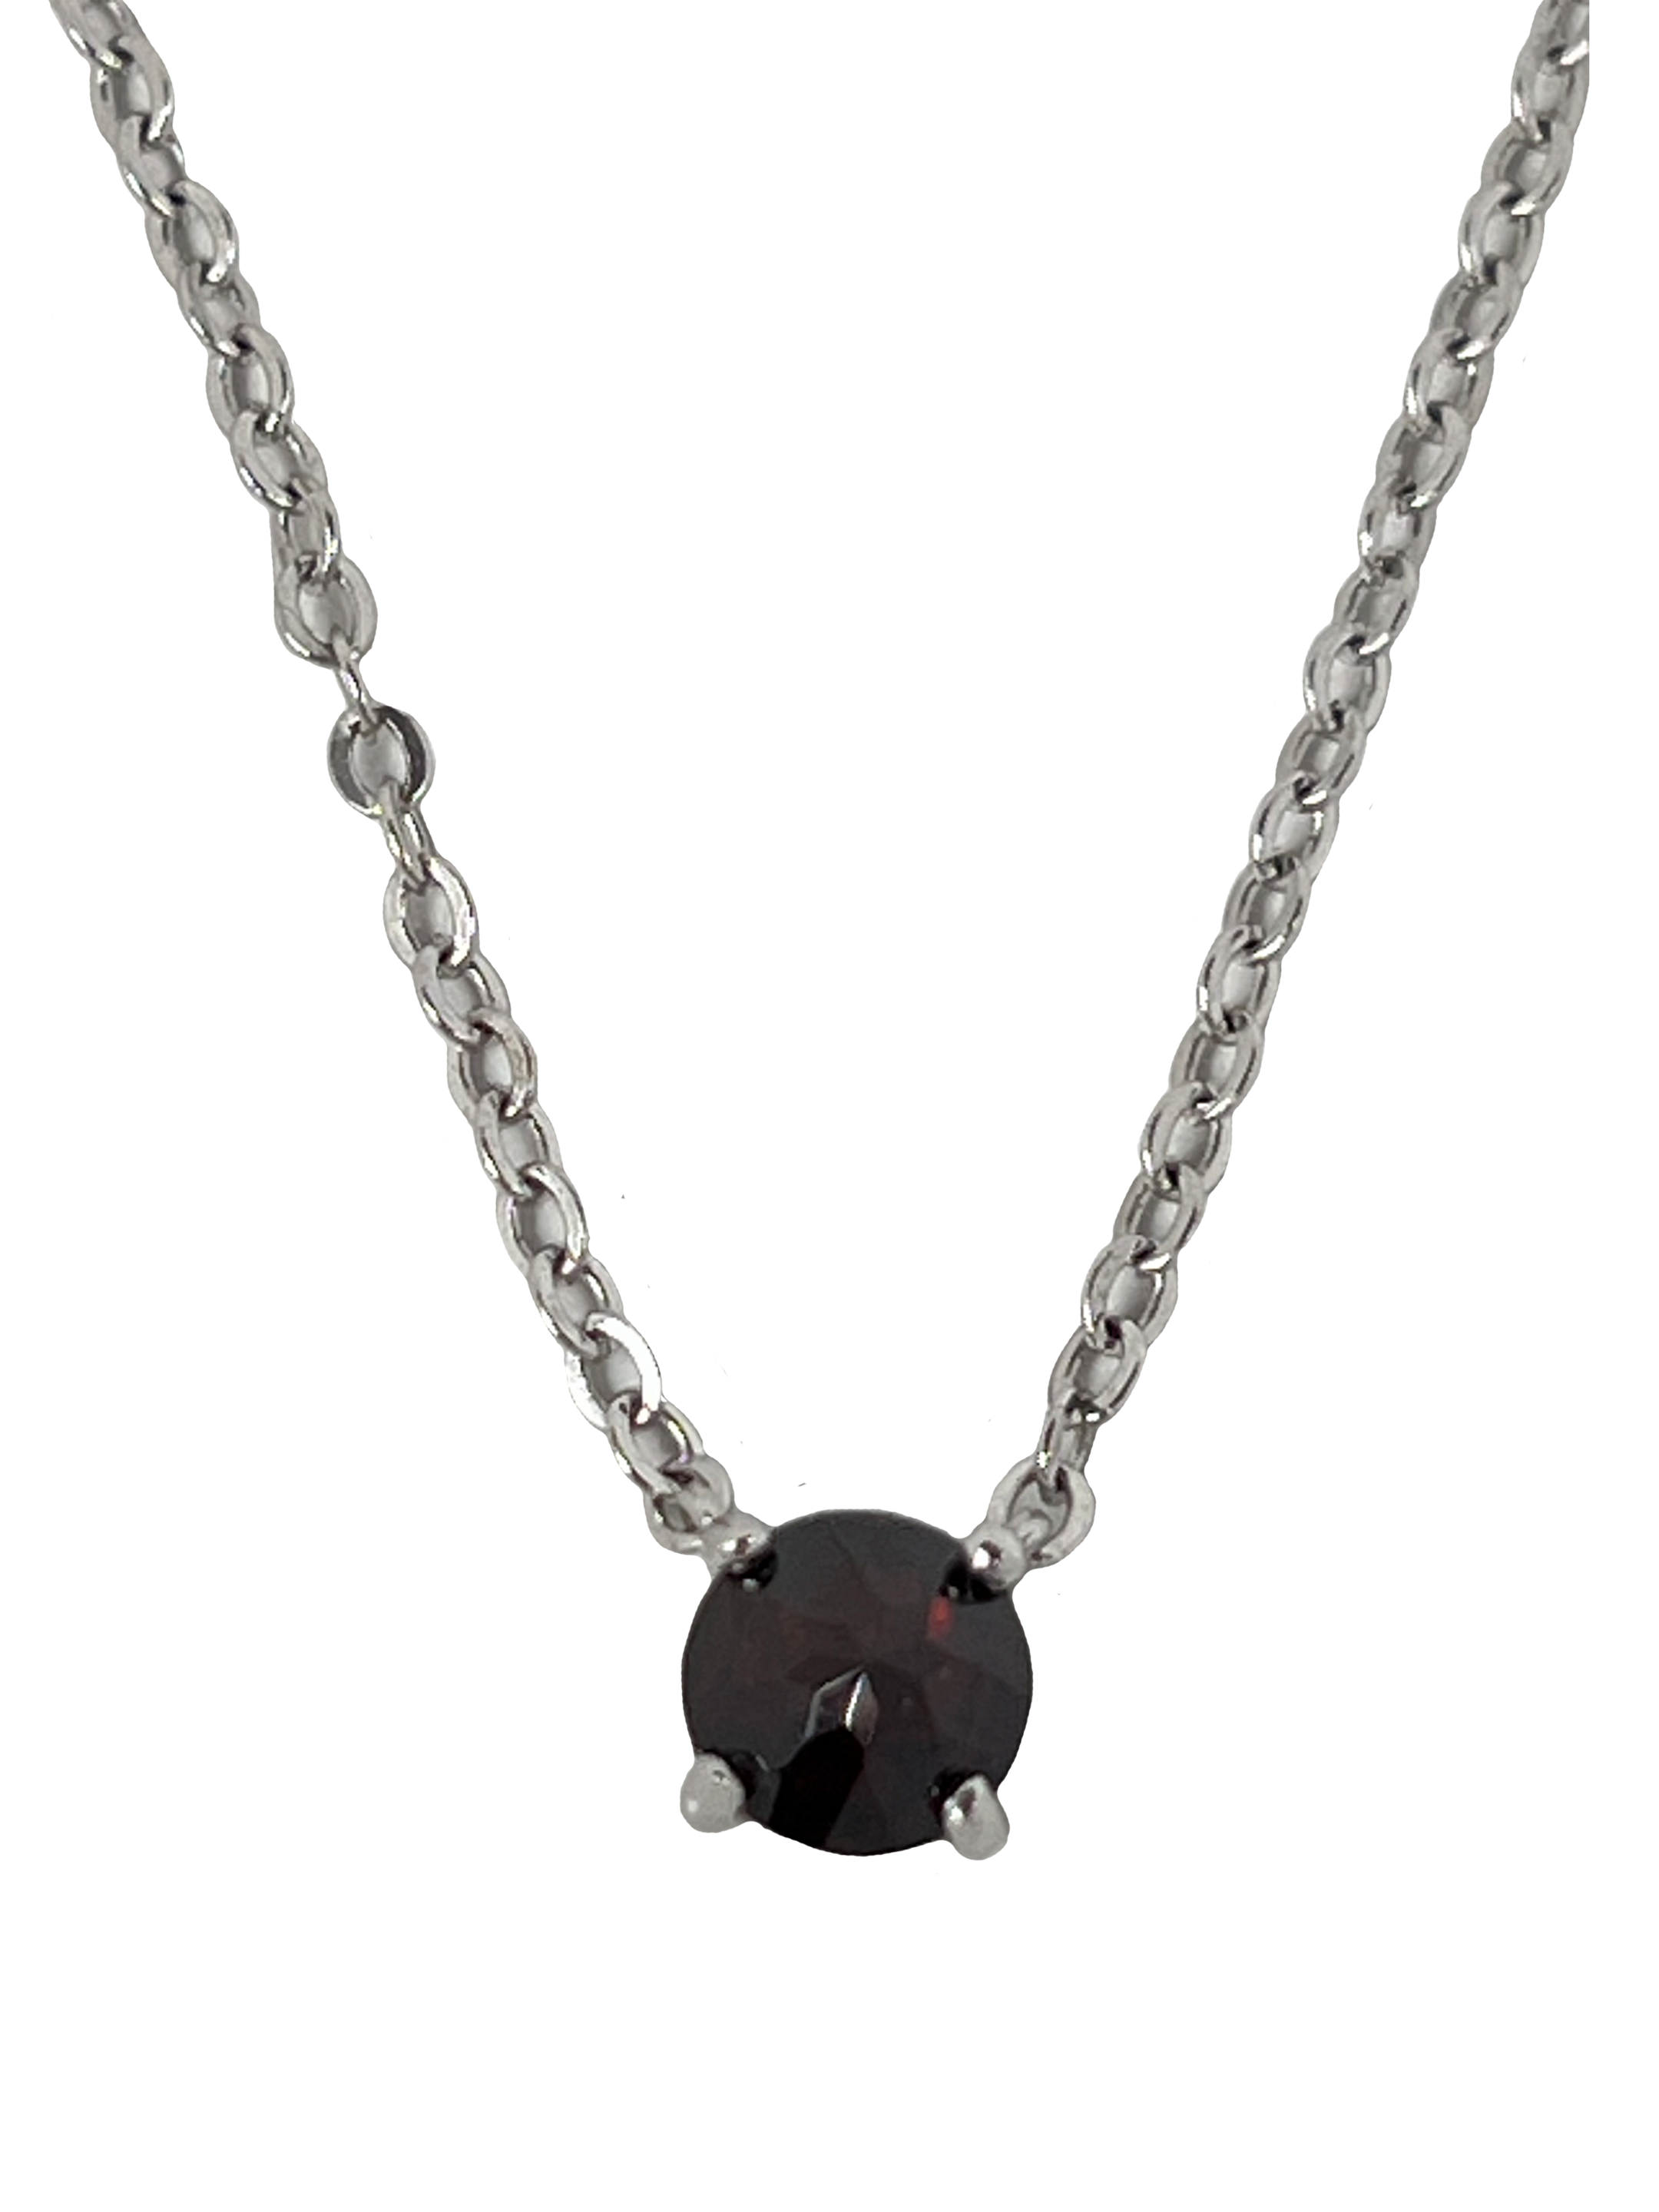 Silver necklace with a red stone